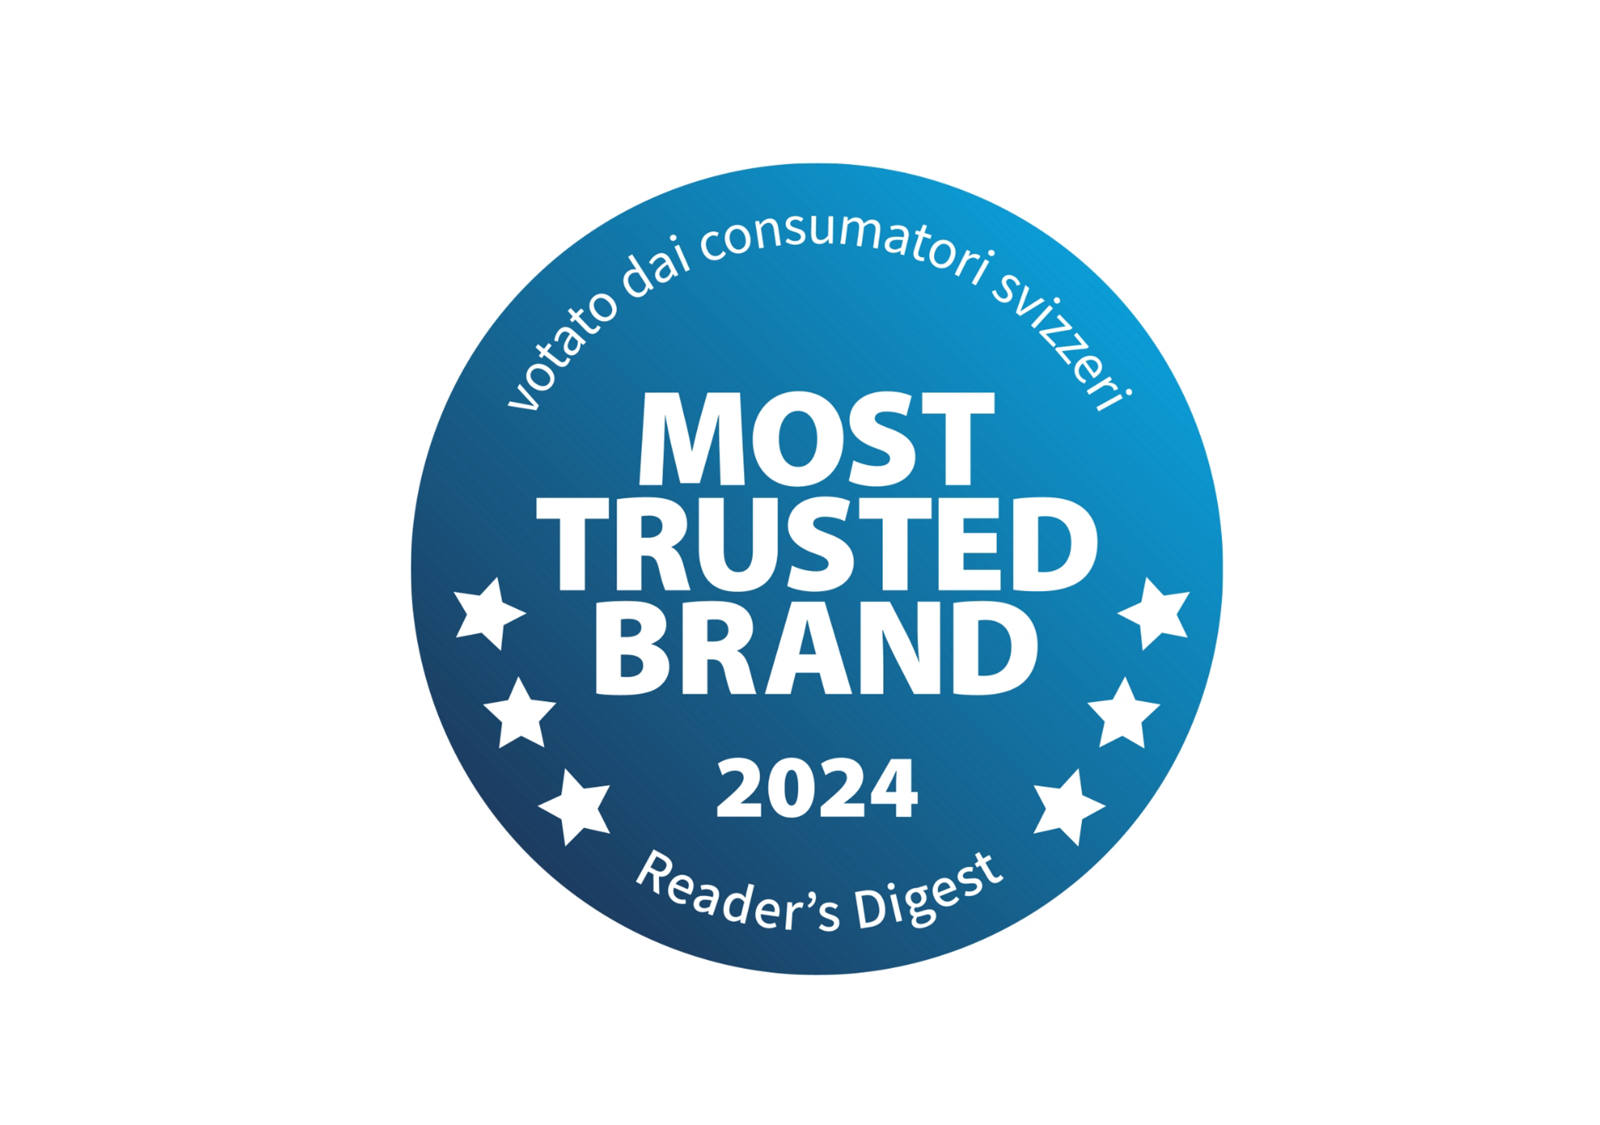 most-trusted-brand-24-transparent-it.jpg